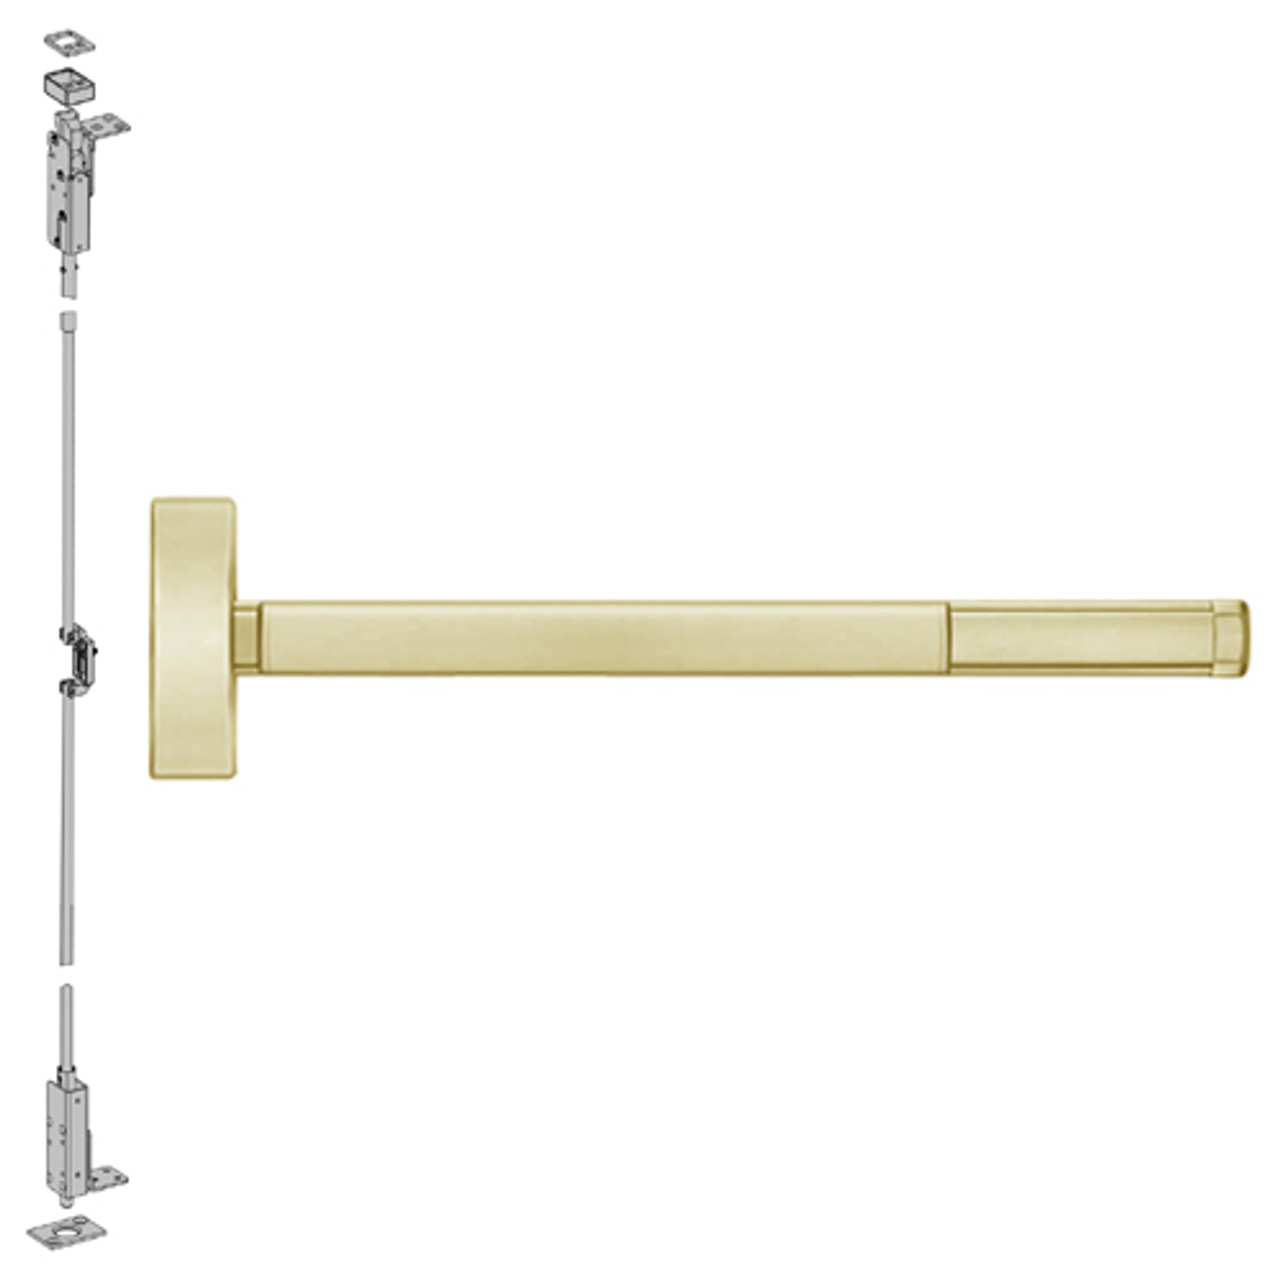 ELRFL2703LBR-606-36 PHI 2700 Series Wood Door Concealed Vertical Exit Device with Electric Latch Retraction Prepped for Key Retracts Latchbolt in Satin Brass Finish